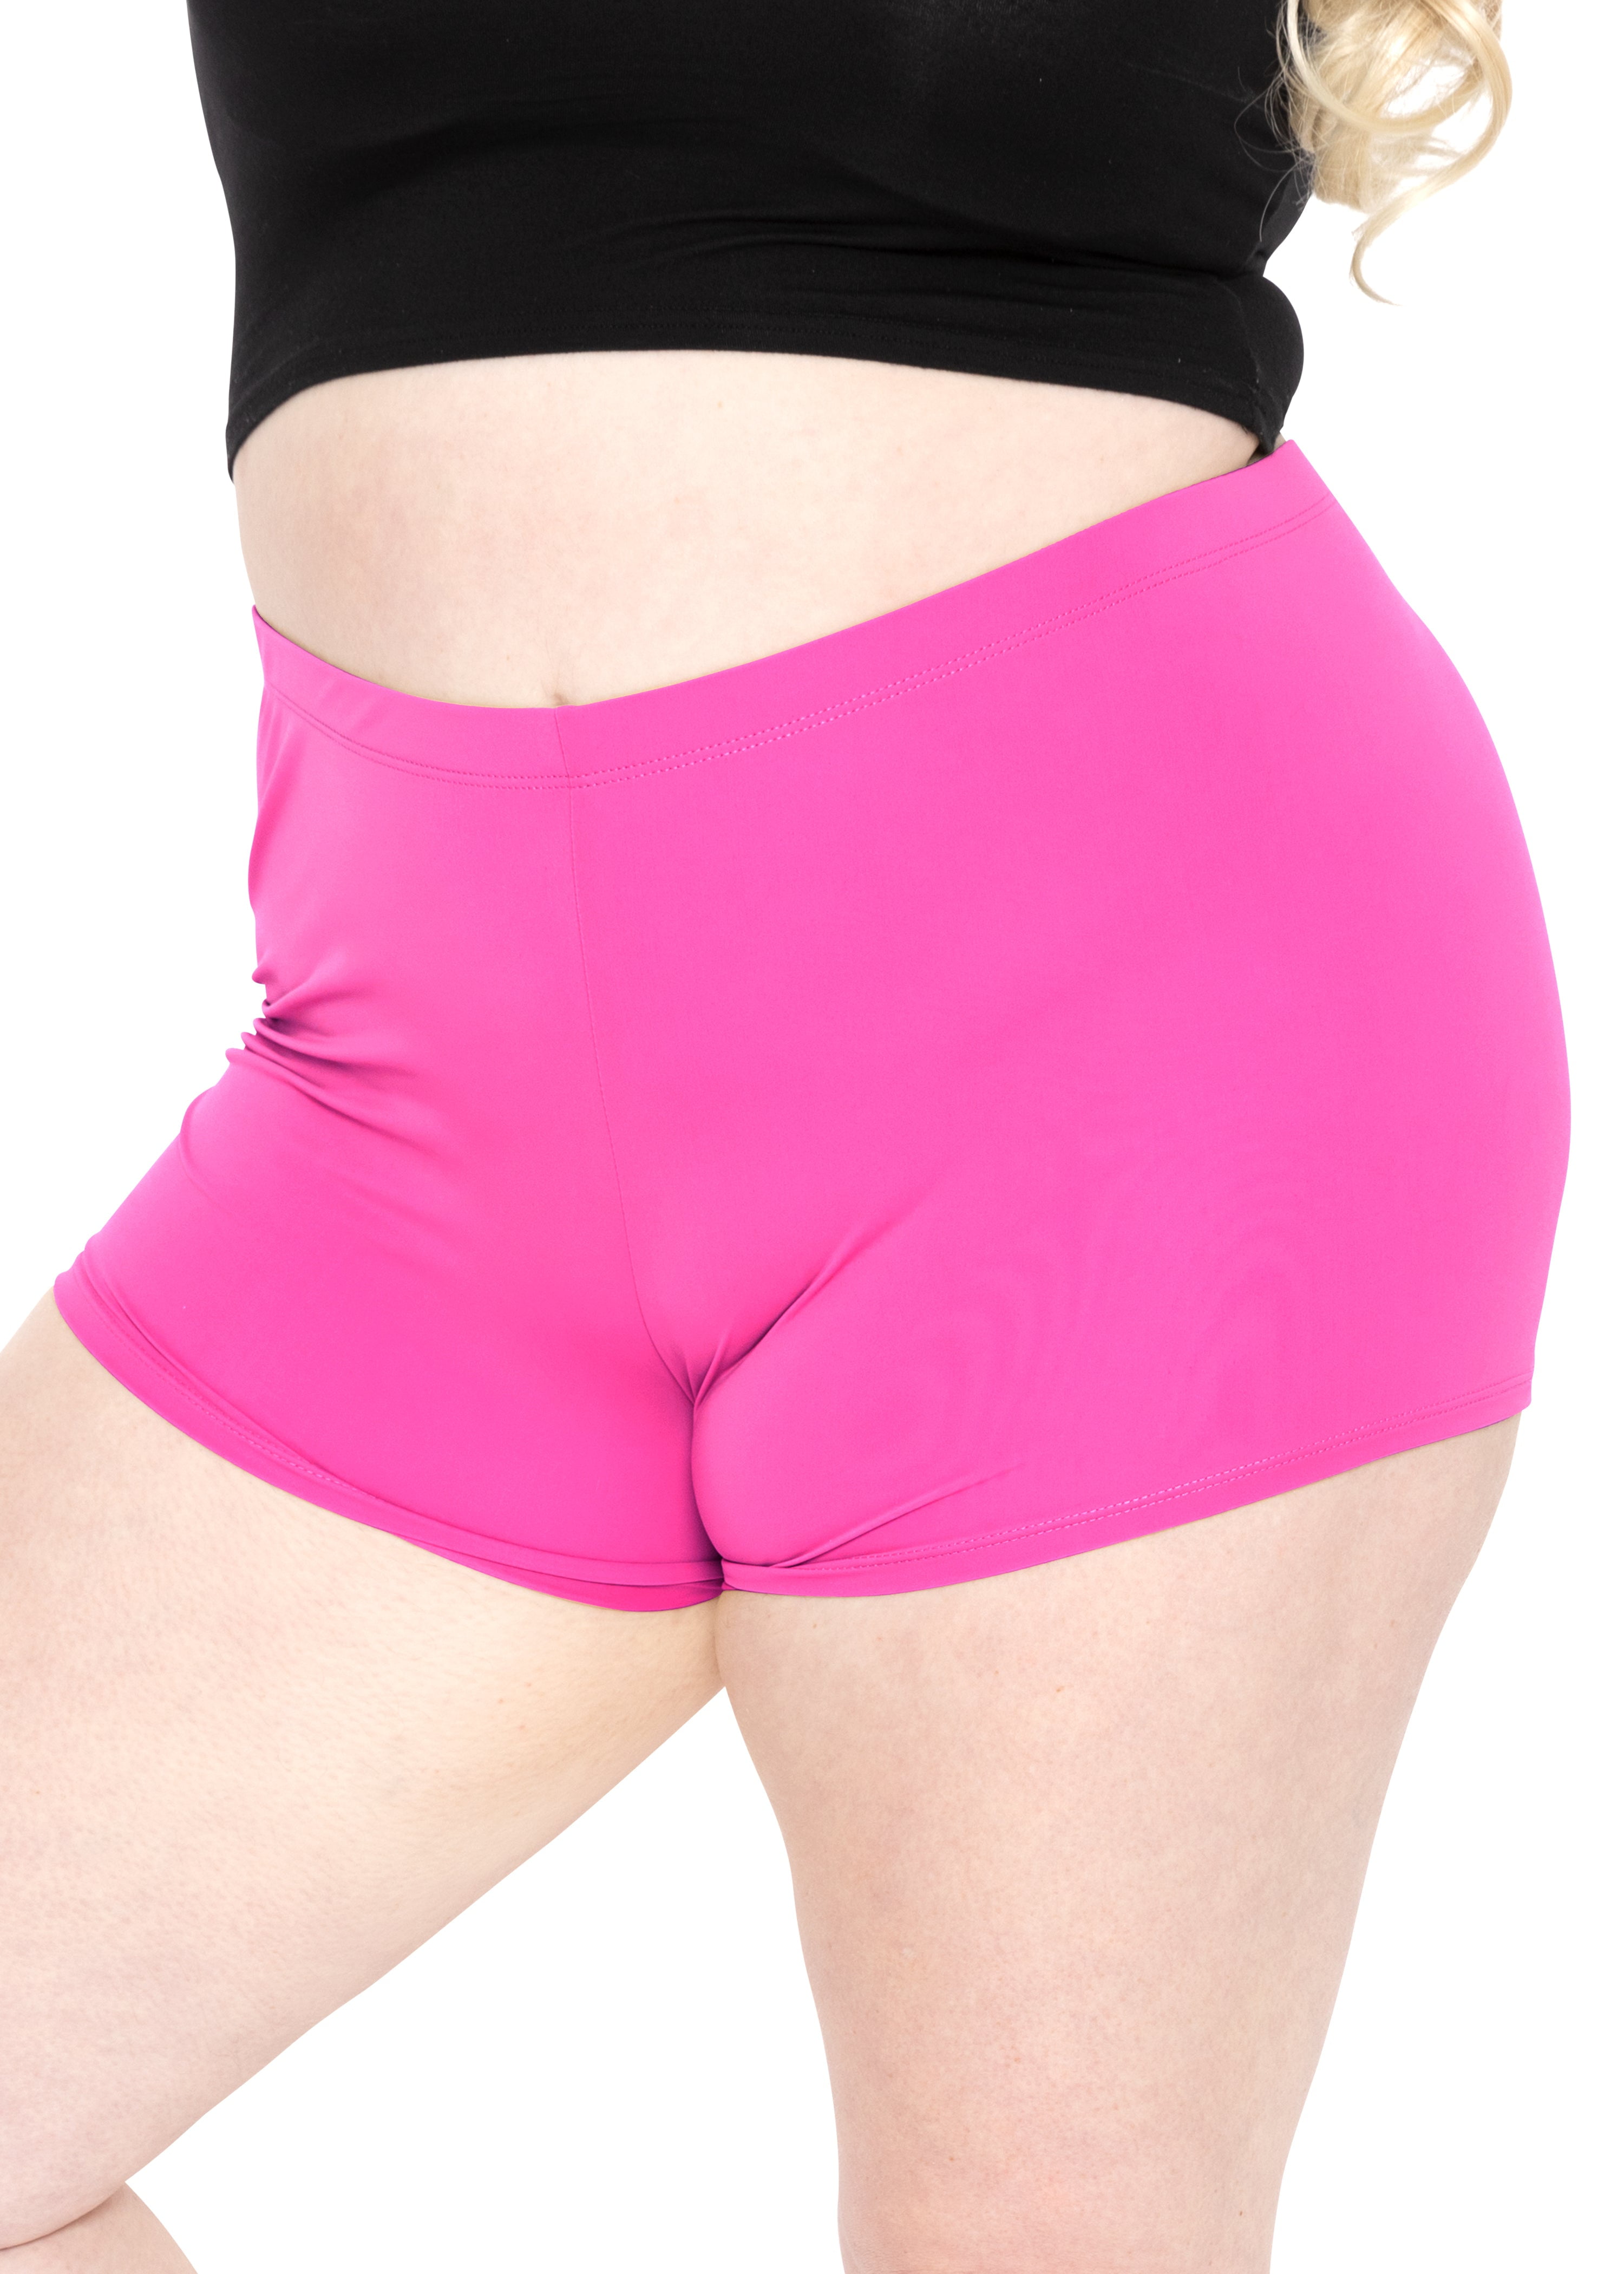 STRETCH IS COMFORT Women's Plus Size Nylon/Spandex Booty Shorts | X-Large -  3X